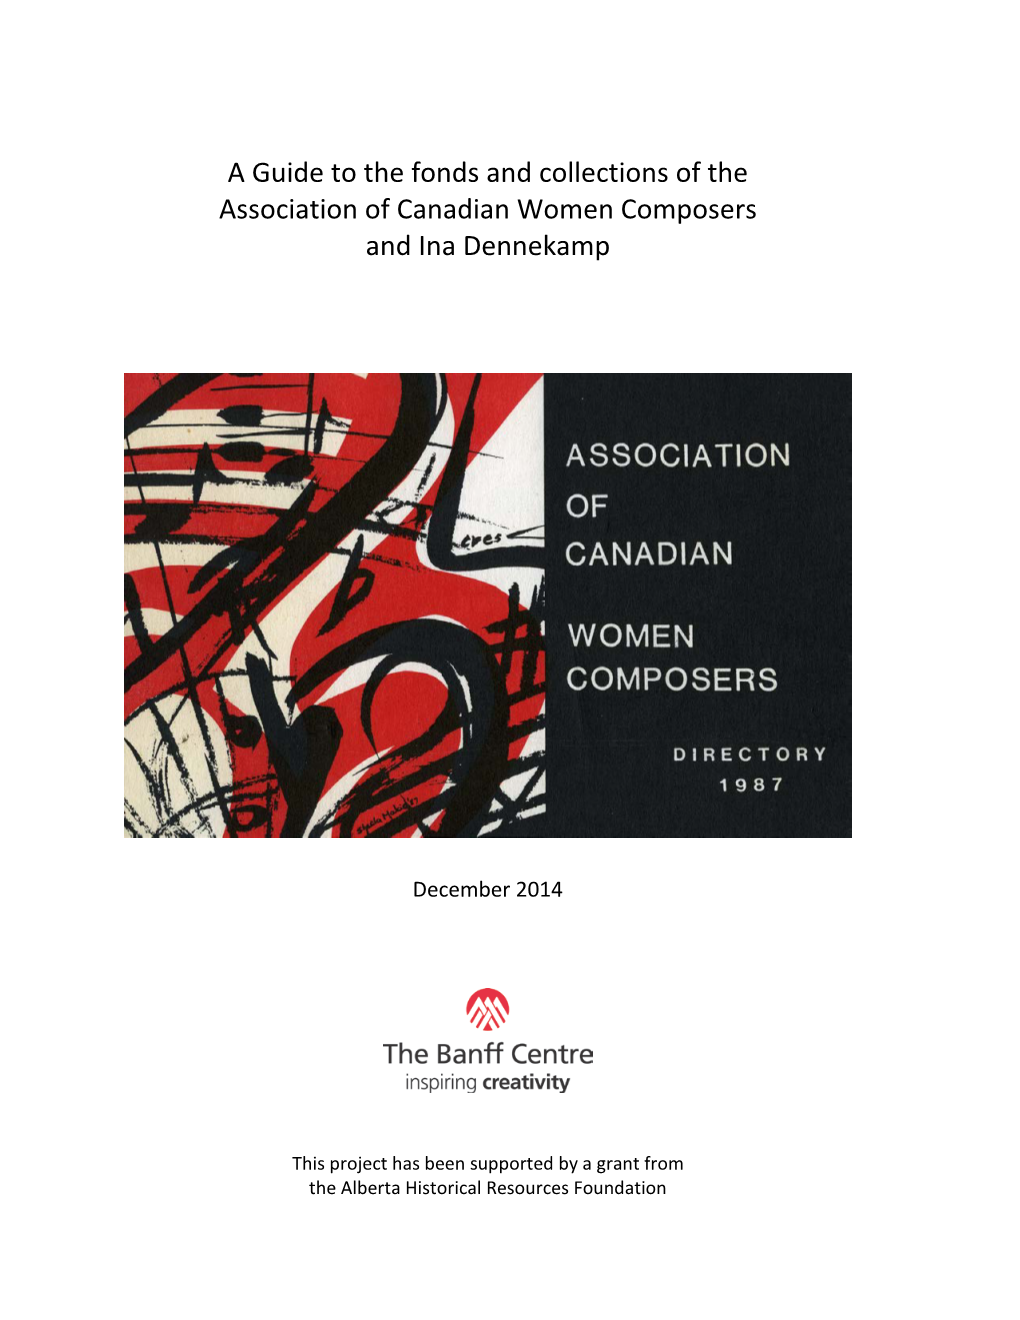 A Guide to the Fonds and Collections of the Association of Canadian Women Composers and Ina Dennekamp